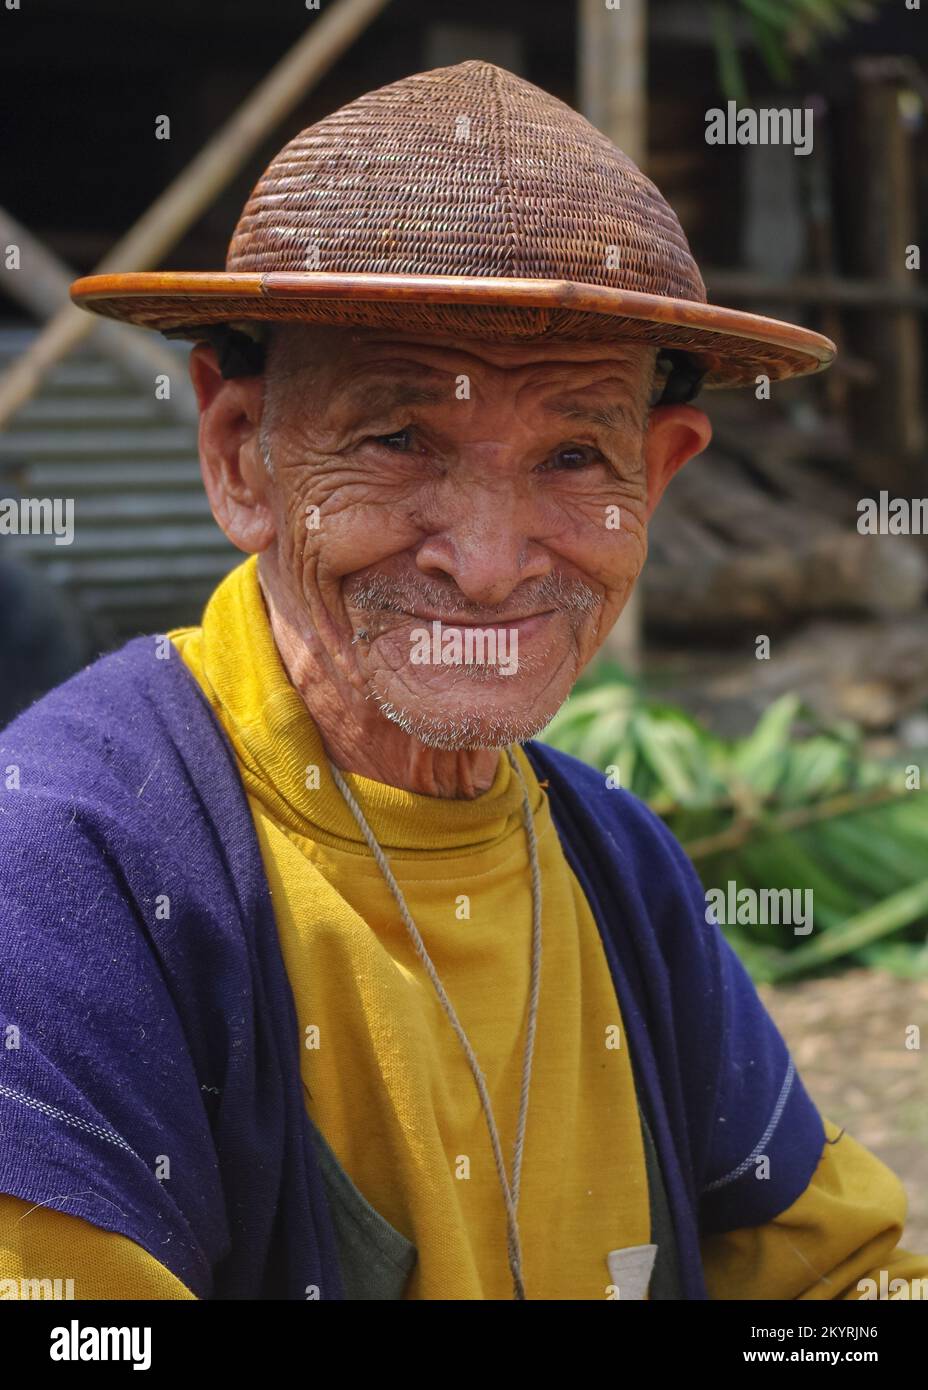 West Siang, Arunachal Pradesh, India - 03 06 2014 : Portrait of smiling old Adi Galong or Galo tribe man wearing traditional boat shaped cane hat Stock Photo